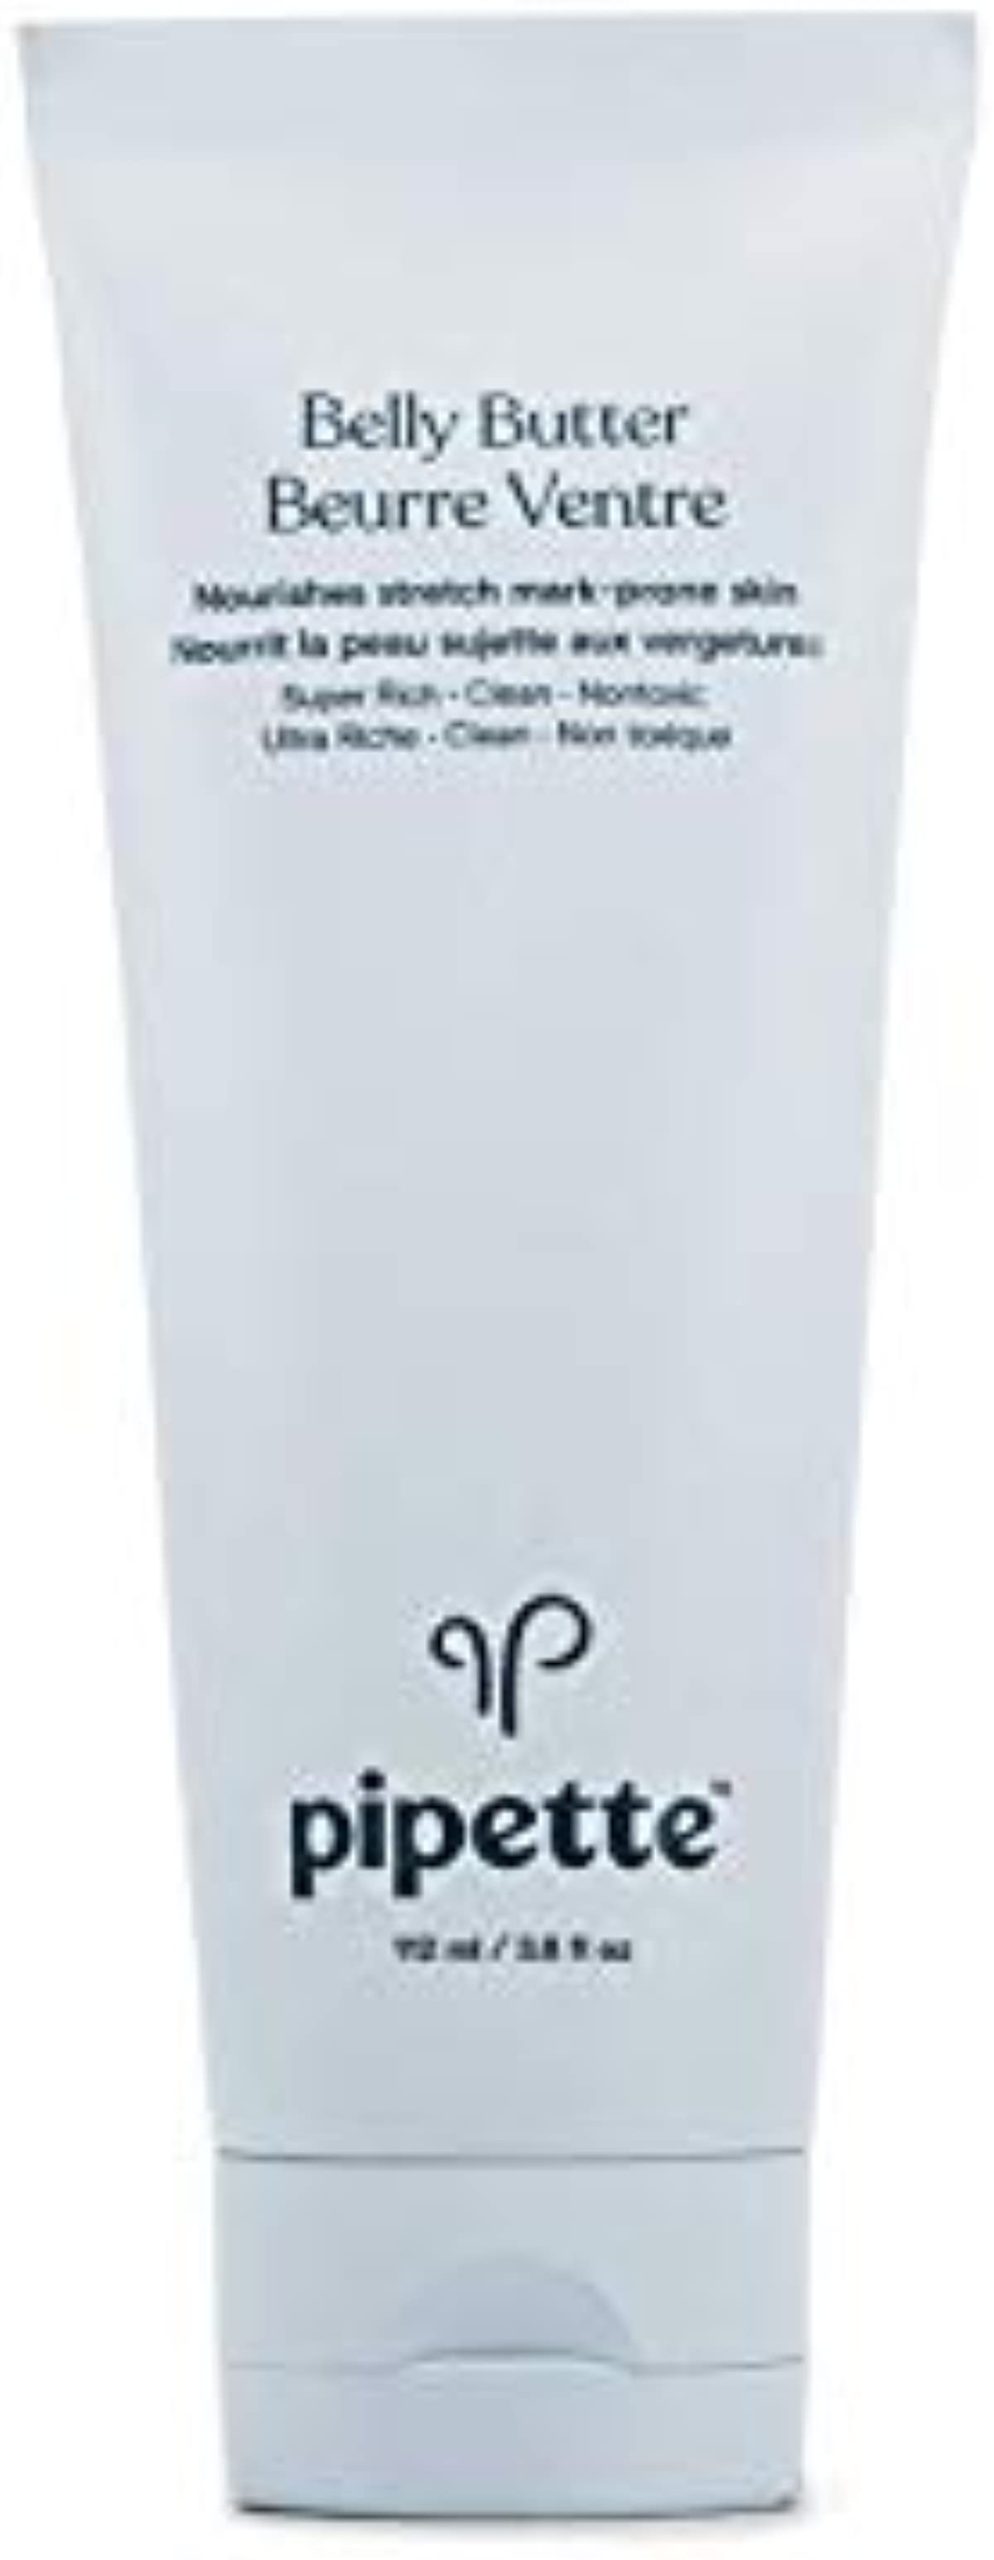 Pipette Belly Butter - Stretch Mark Cream for Pregnancy, Clean Hydrating Ingredients to Help Retain Skin’s Moisture, Shea Butter & Squalane, 3.8 fl oz